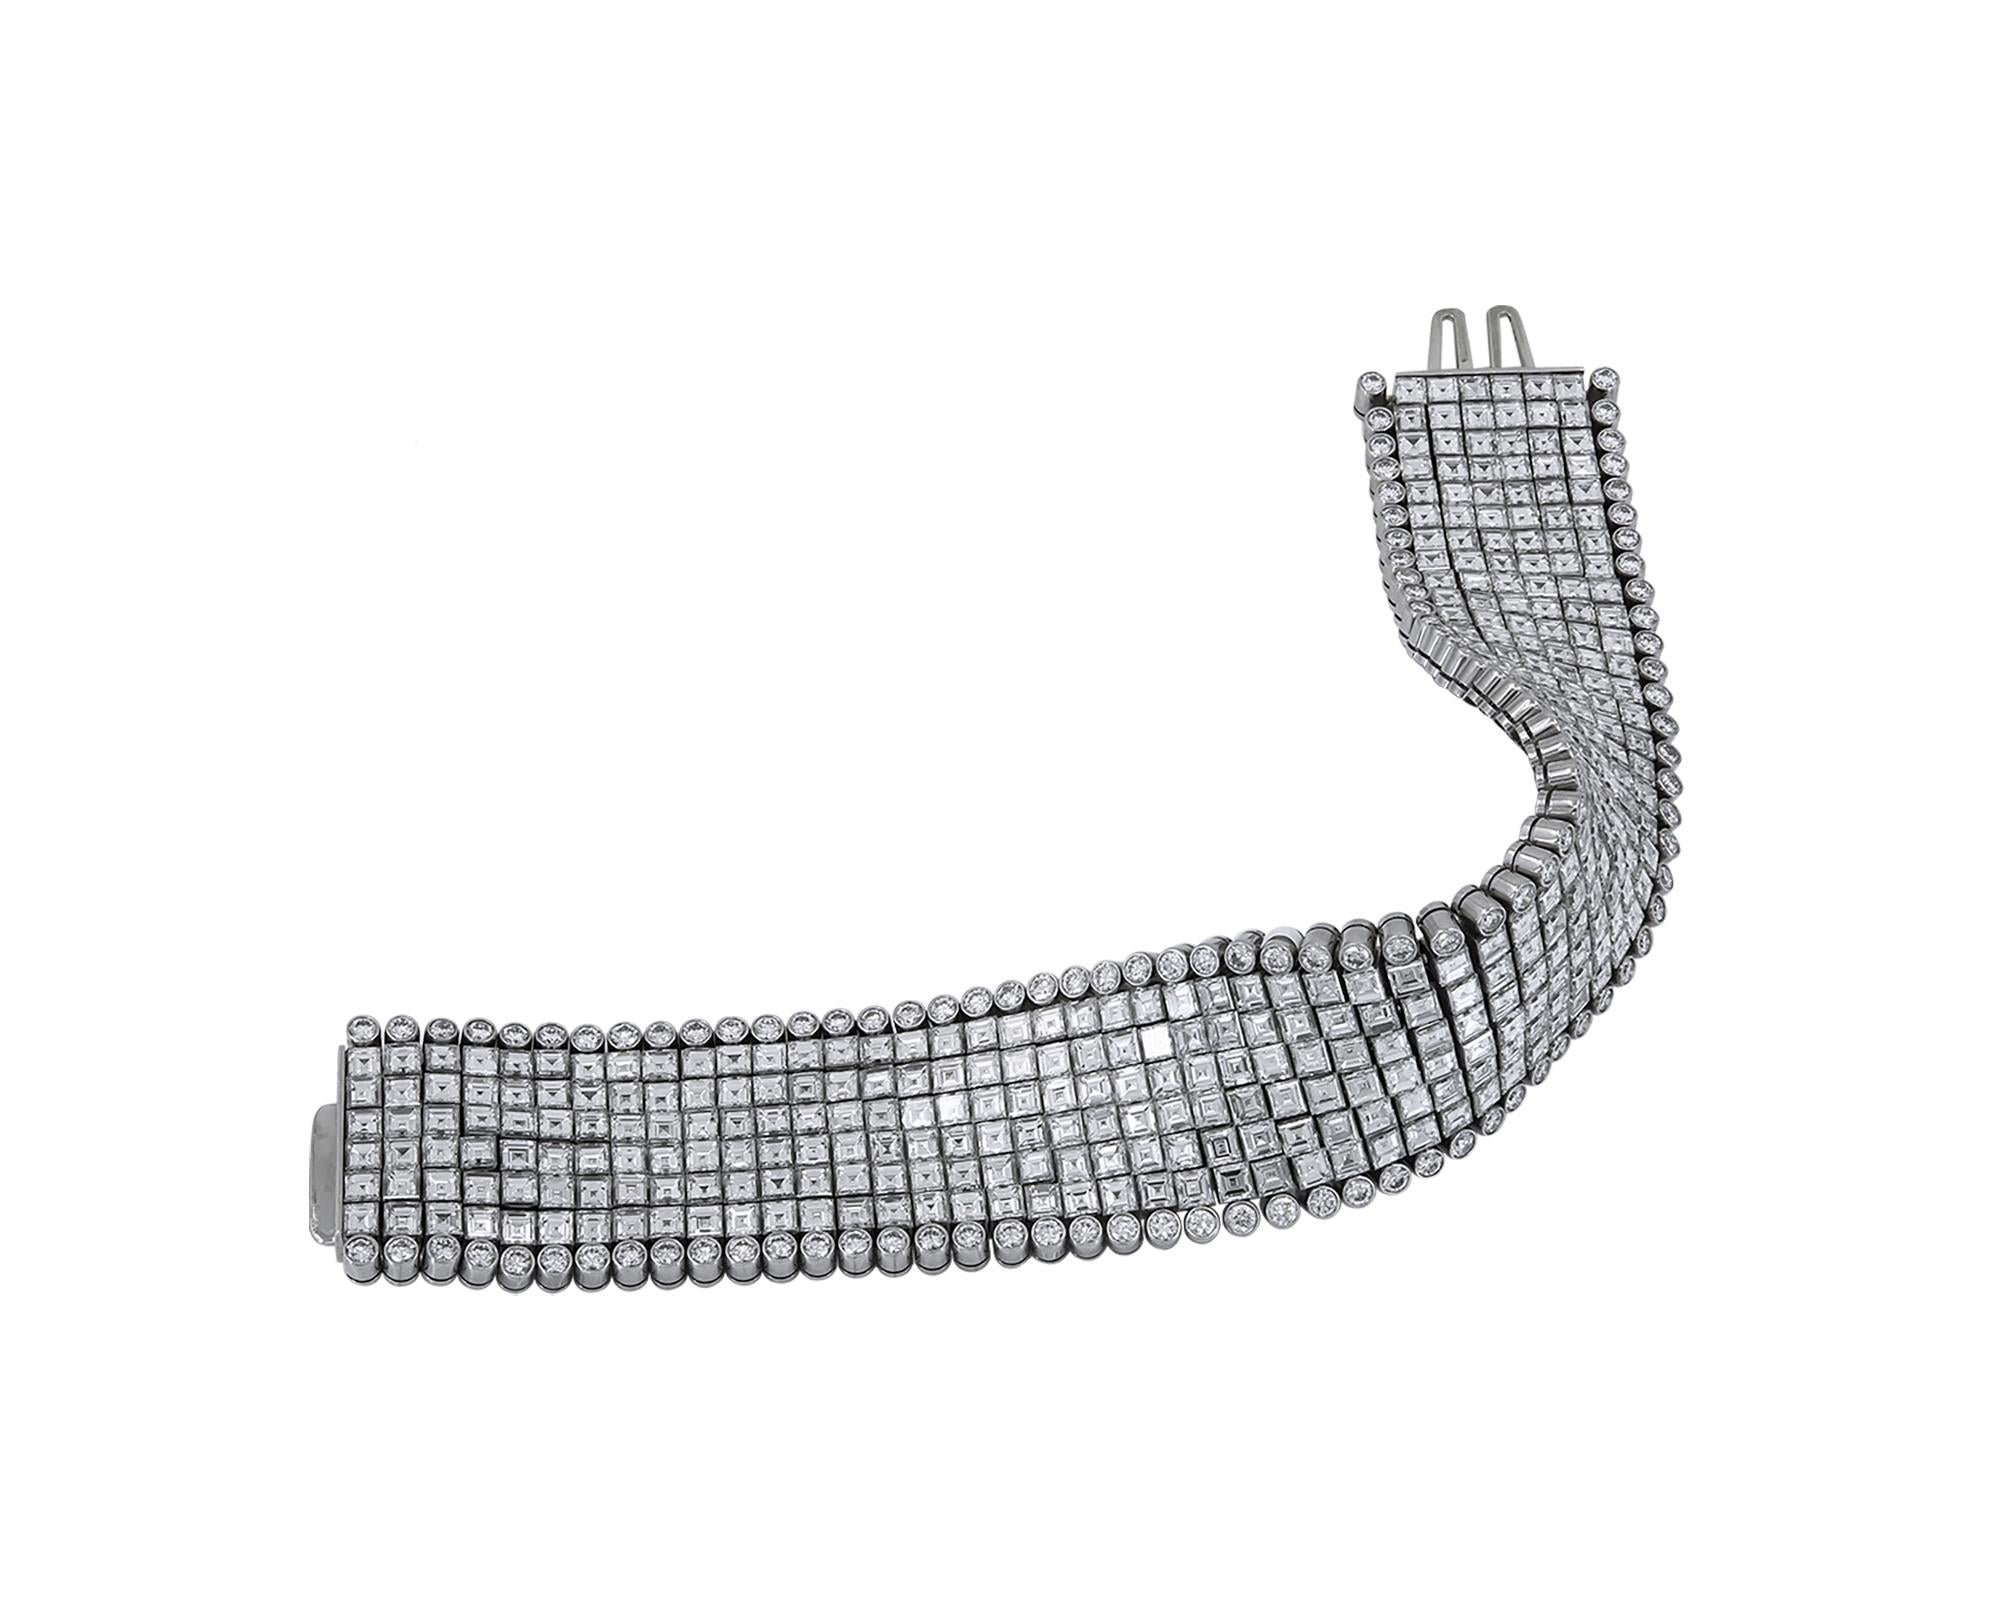 A stunning bracelet created by Oscar Heyman.
It's decorated with mixed shape diamonds and mounted in platinum. 
265 ascher cut diamonds with the total weight of 45.25 carats.
106 round diamonds weighing 6.63 carats total.
The diamonds are equivalent